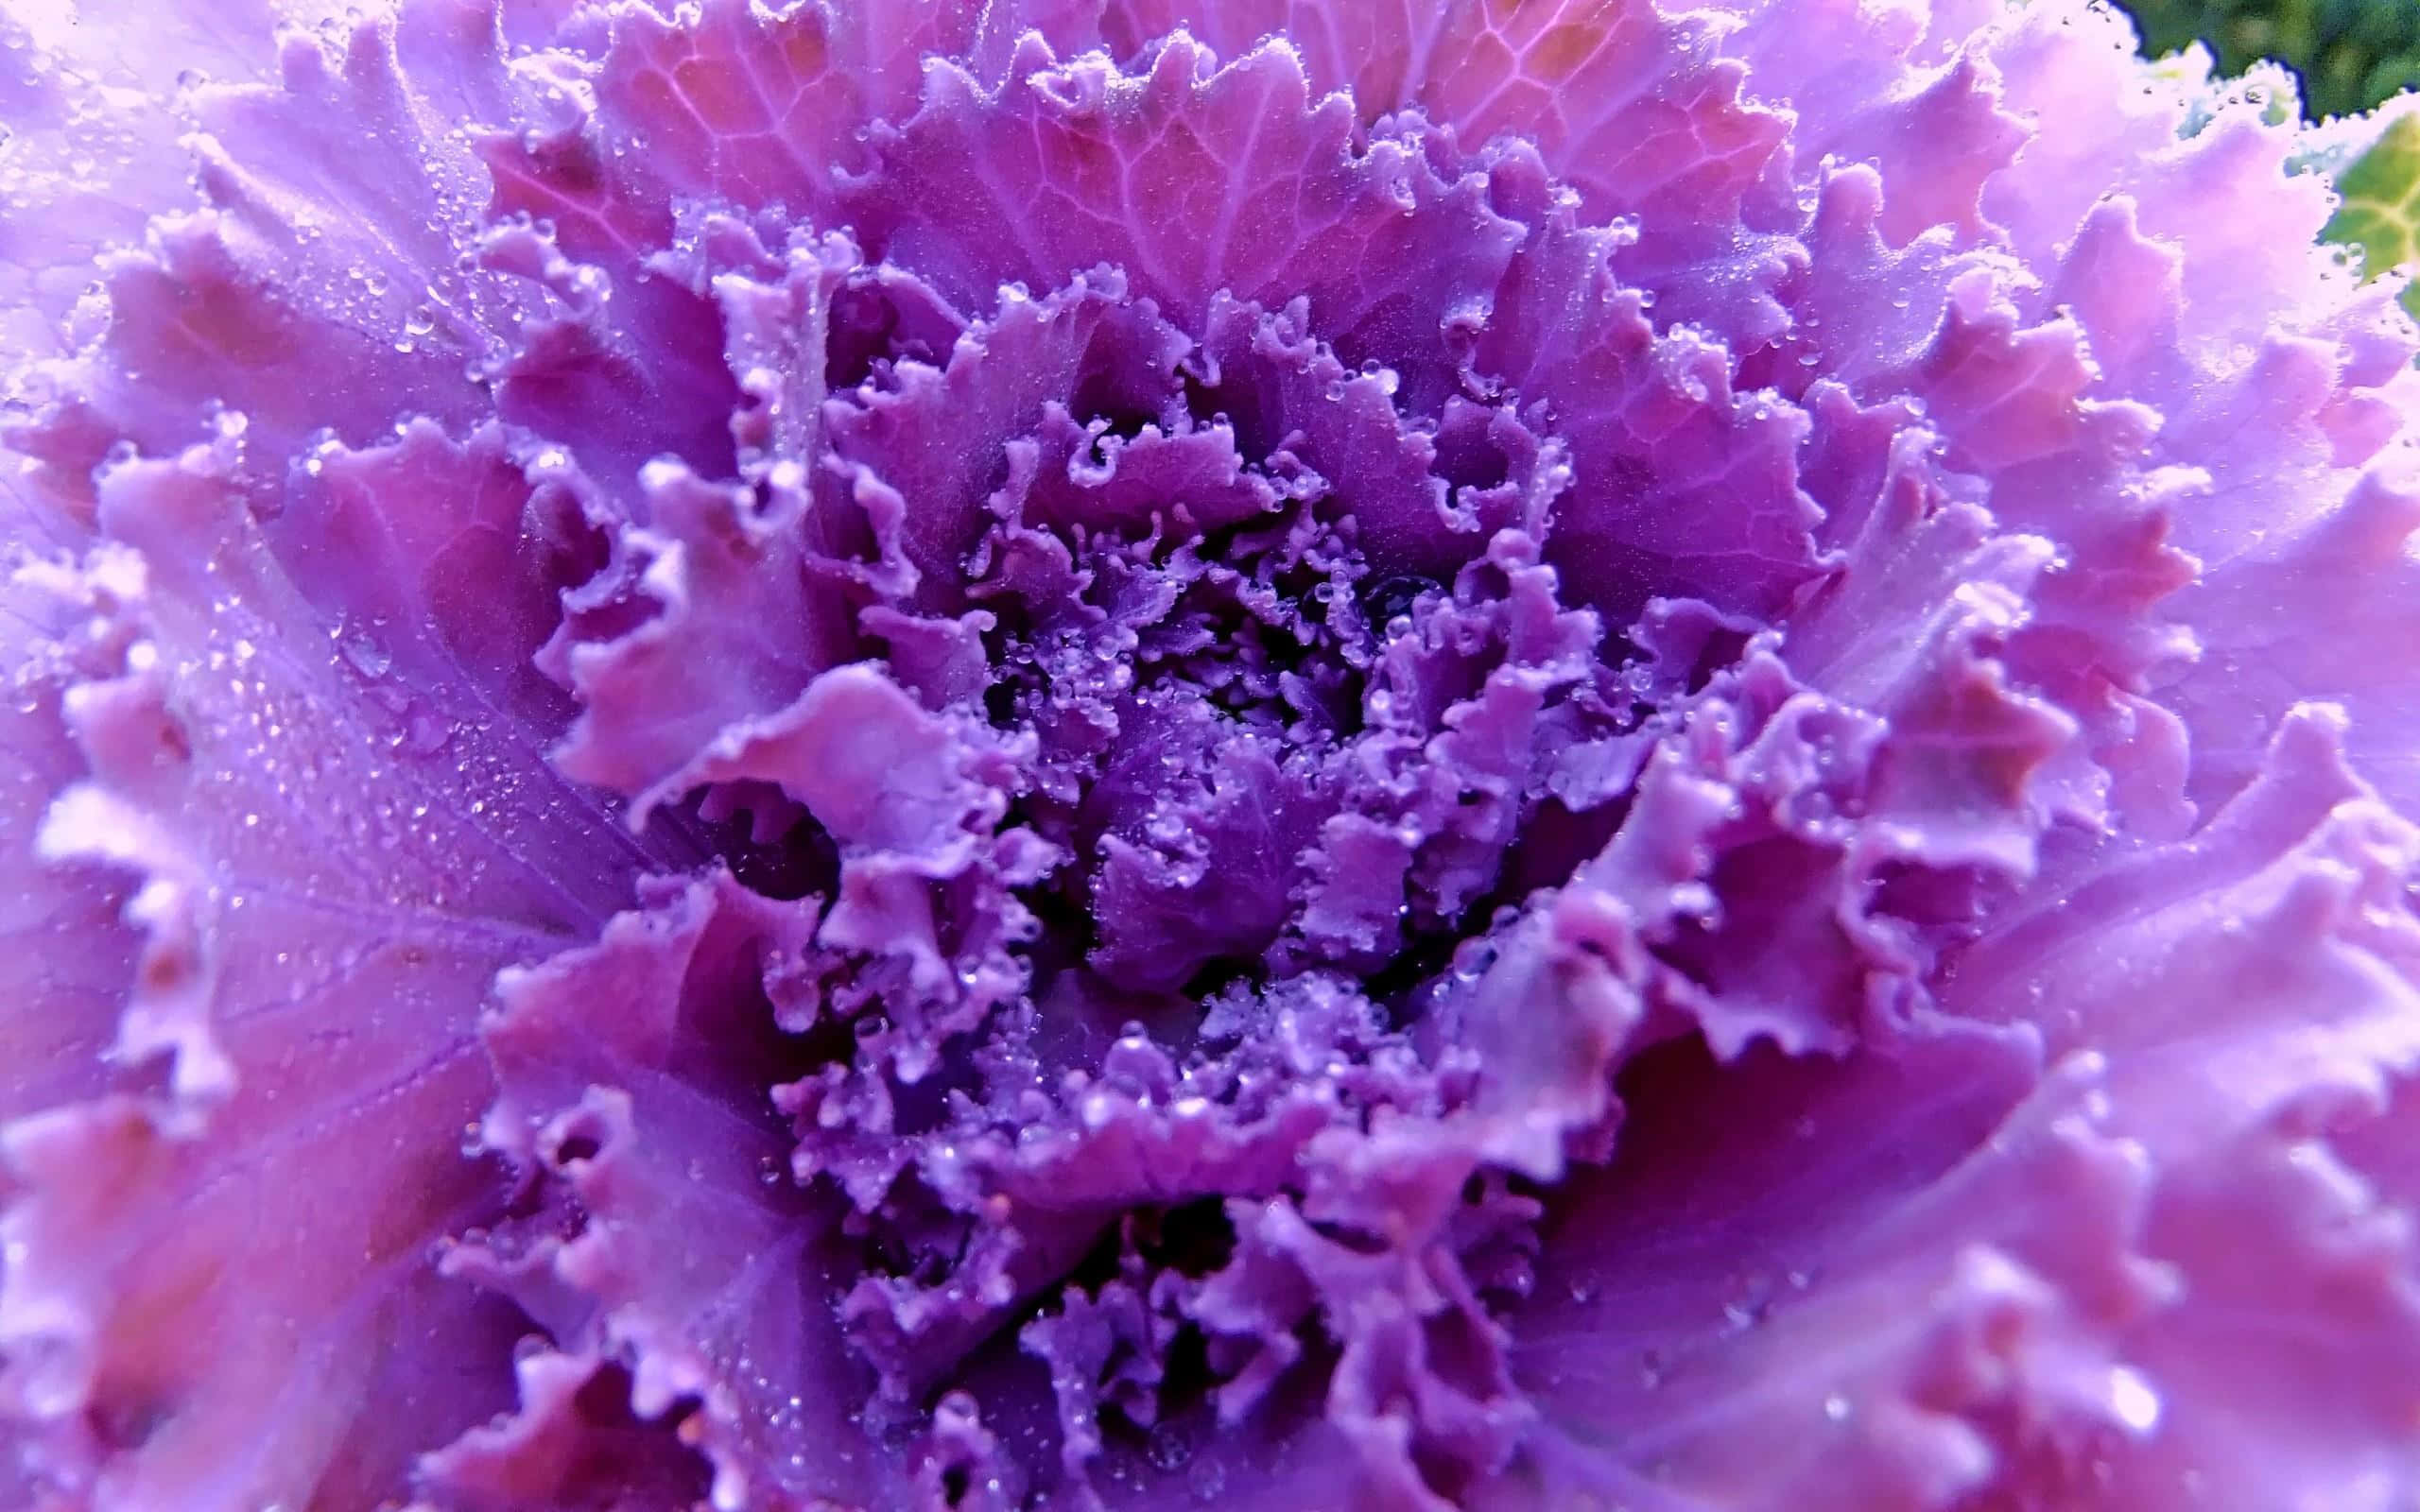 Purple Kale is a Nutrient-Packed Superfood Wallpaper